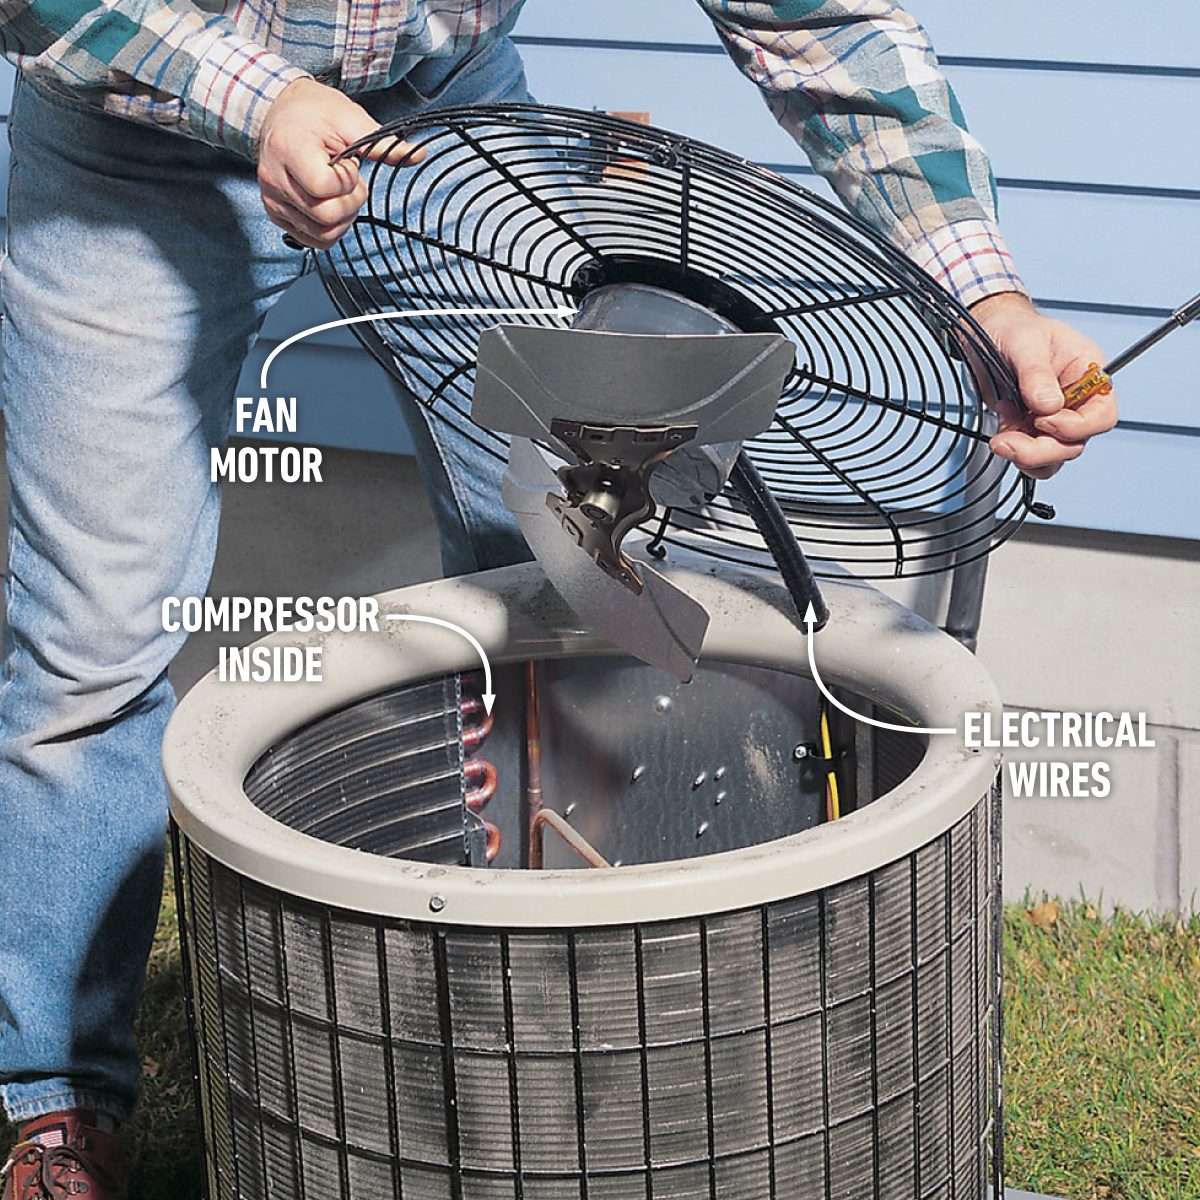 How To Clean An Air Conditioner Completely